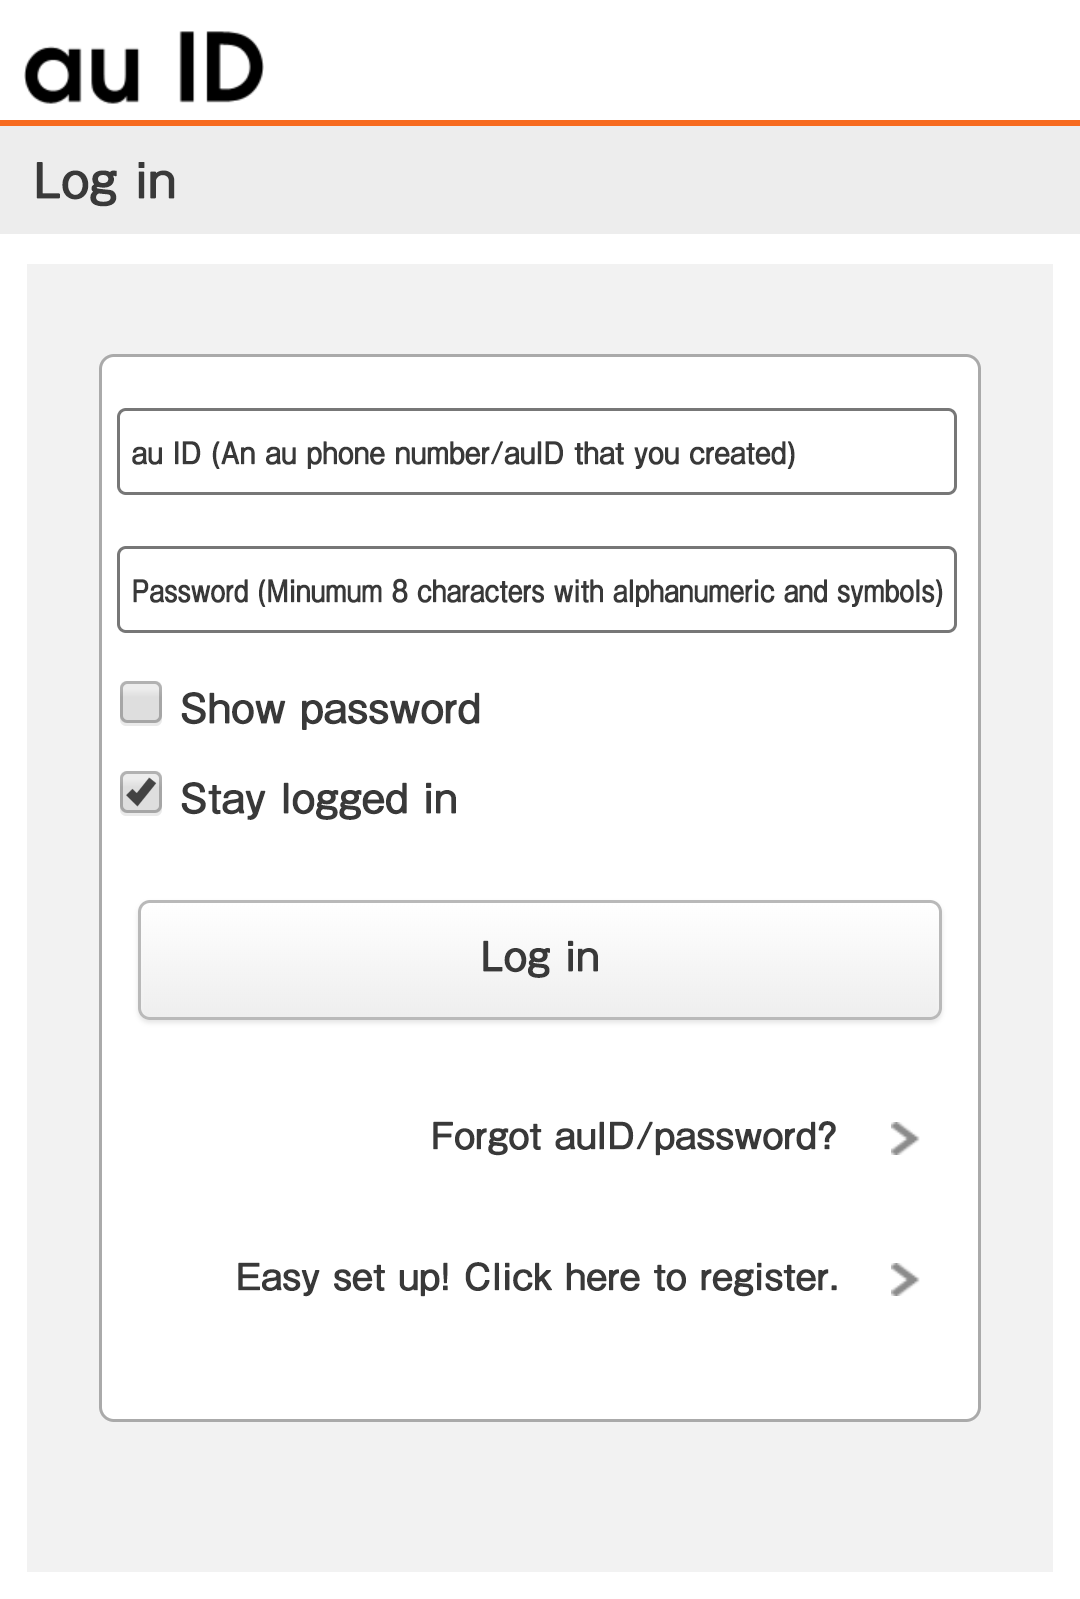 1. Enter au ID and password to log in.